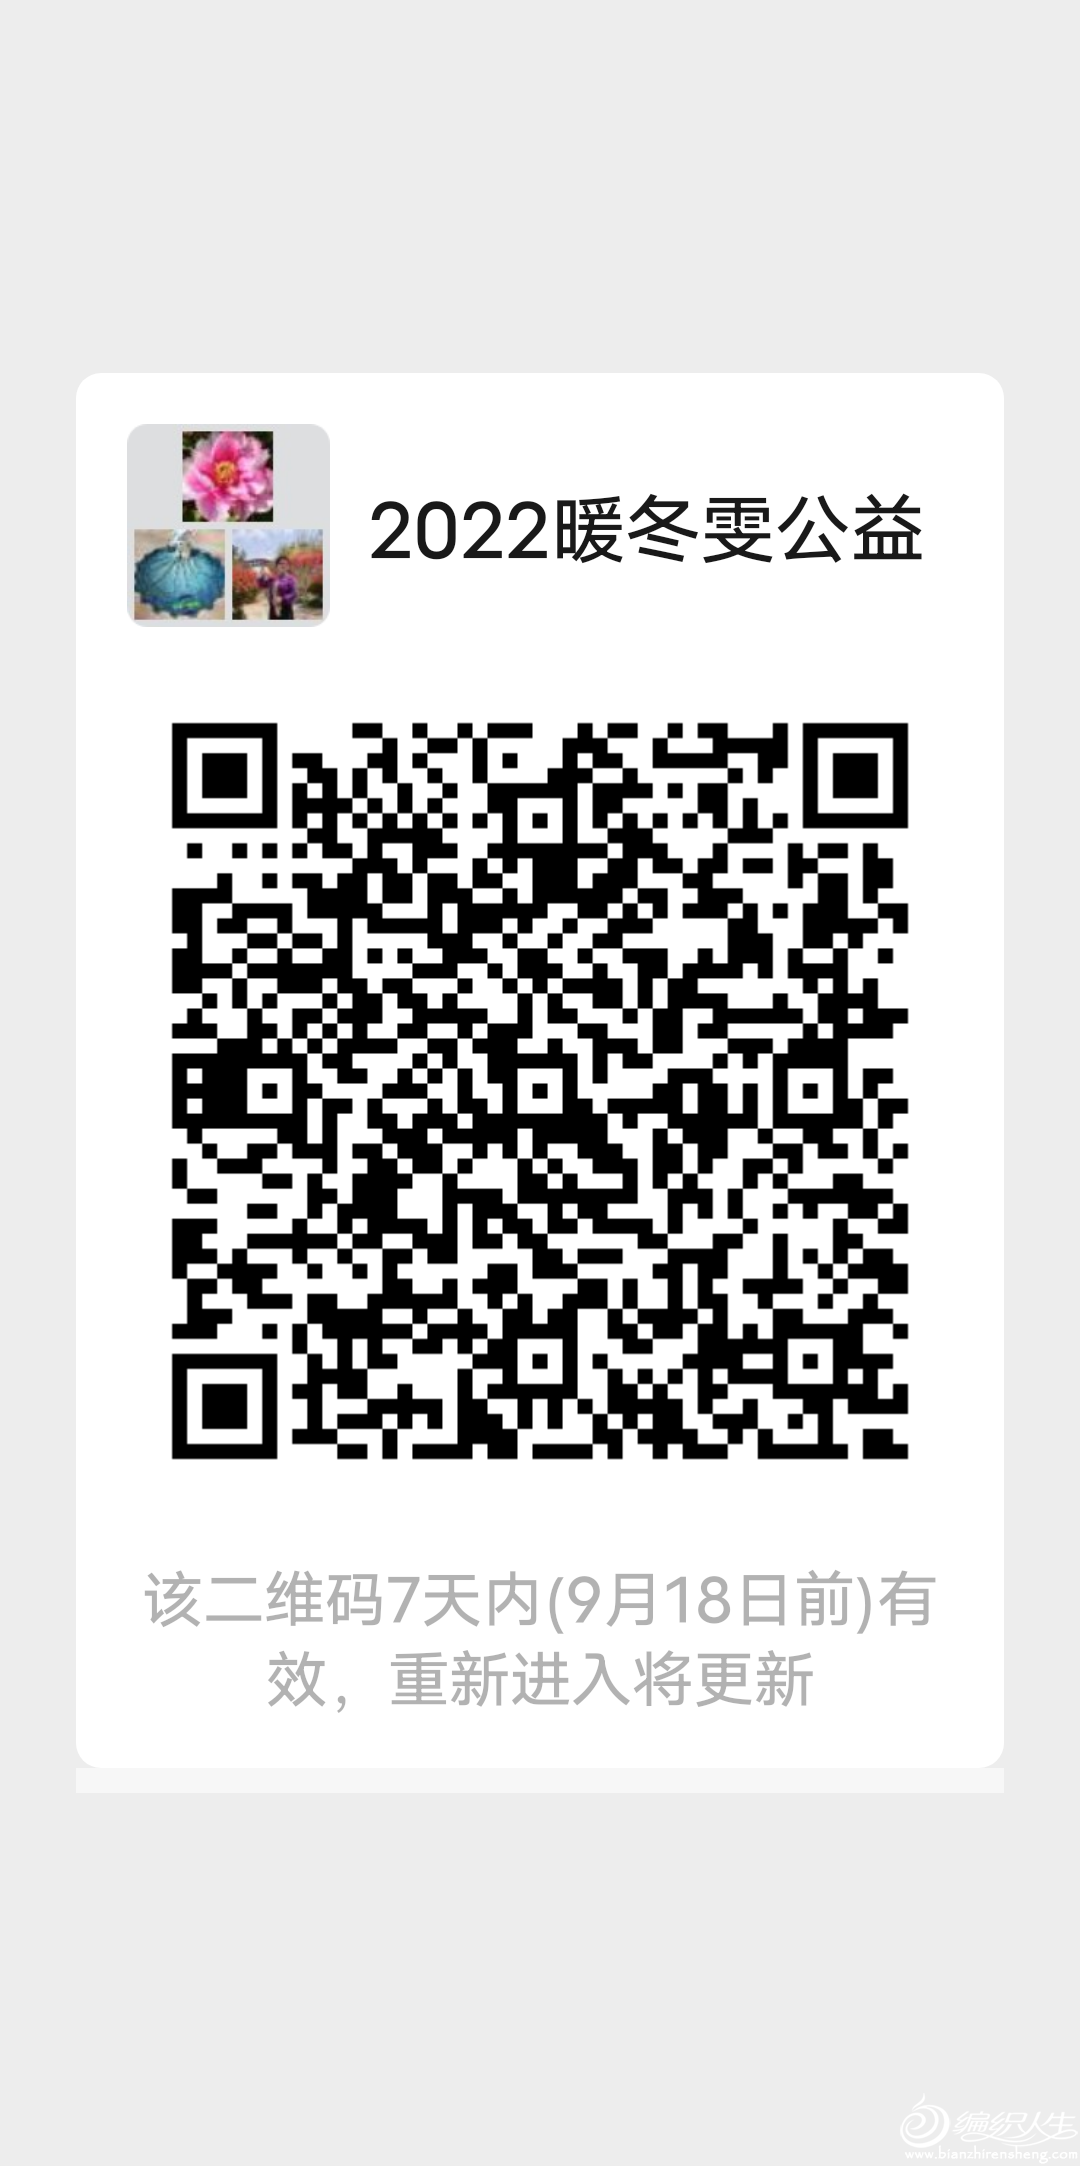 mmqrcode1662903122551.png